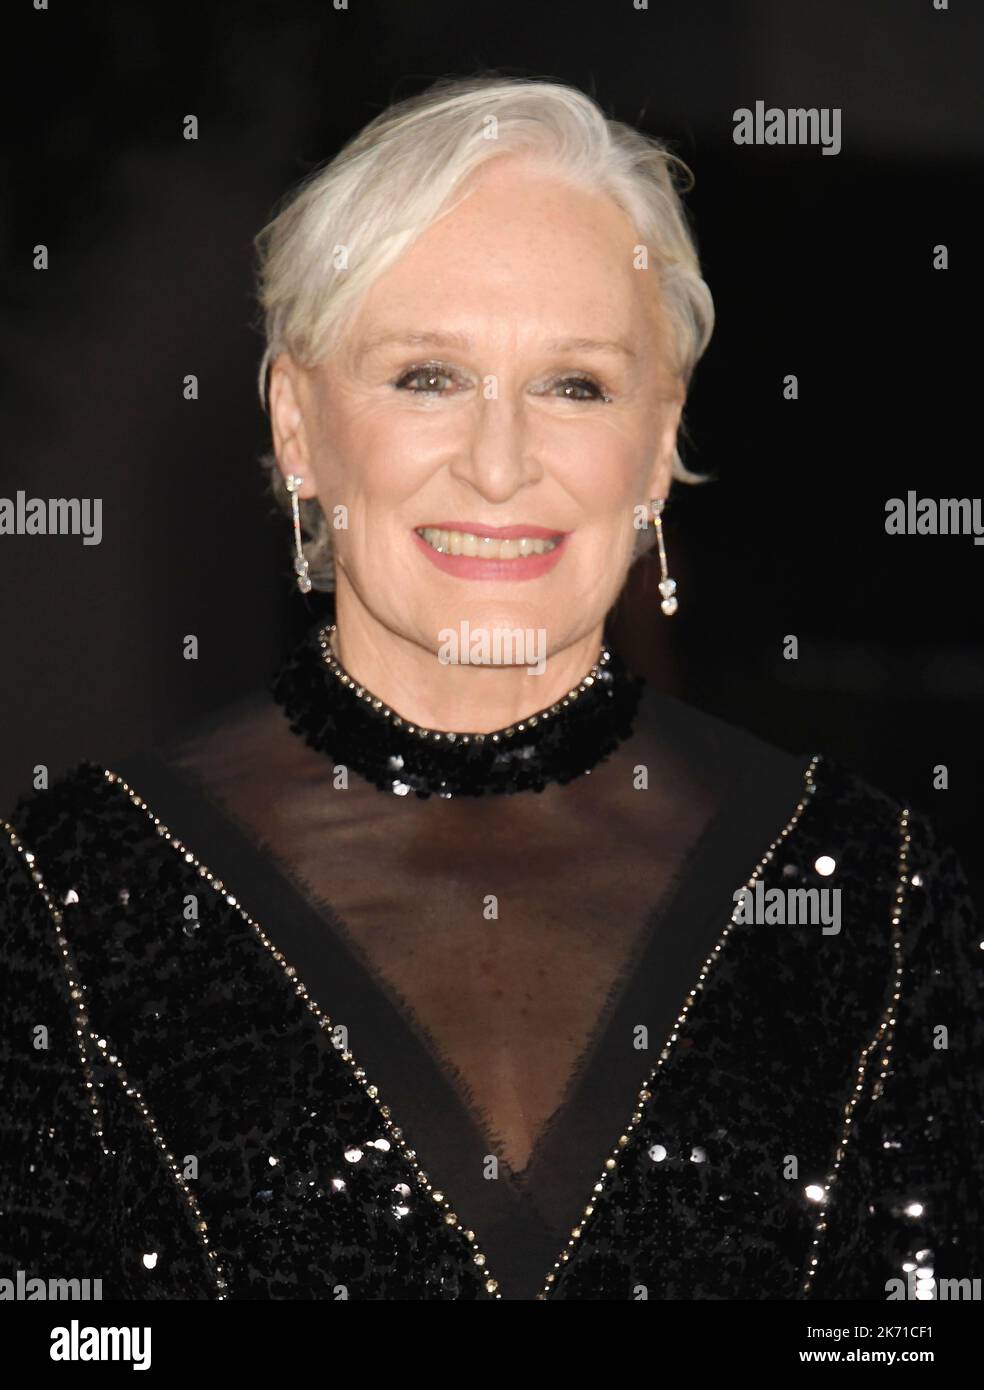 LOS ANGELES, CA - OCTOBER 15: Glenn Close attends the 2nd Annual Academy Museum Gala at Academy Museum of Motion Pictures on October 15, 2022 in Los A Stock Photo